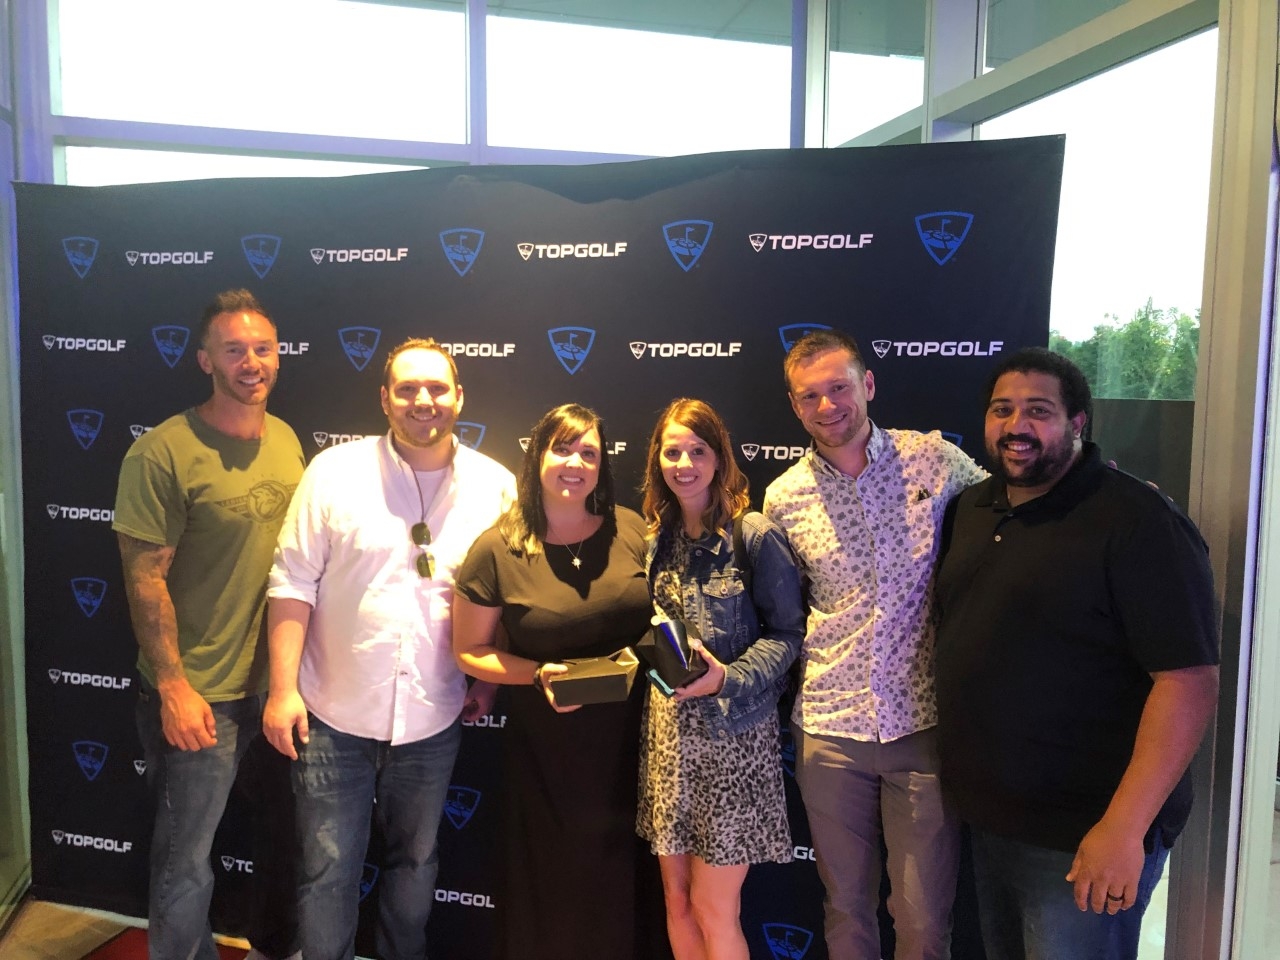 Our Pittsburgh team and regional crew enjoying a night out at Topgolf.